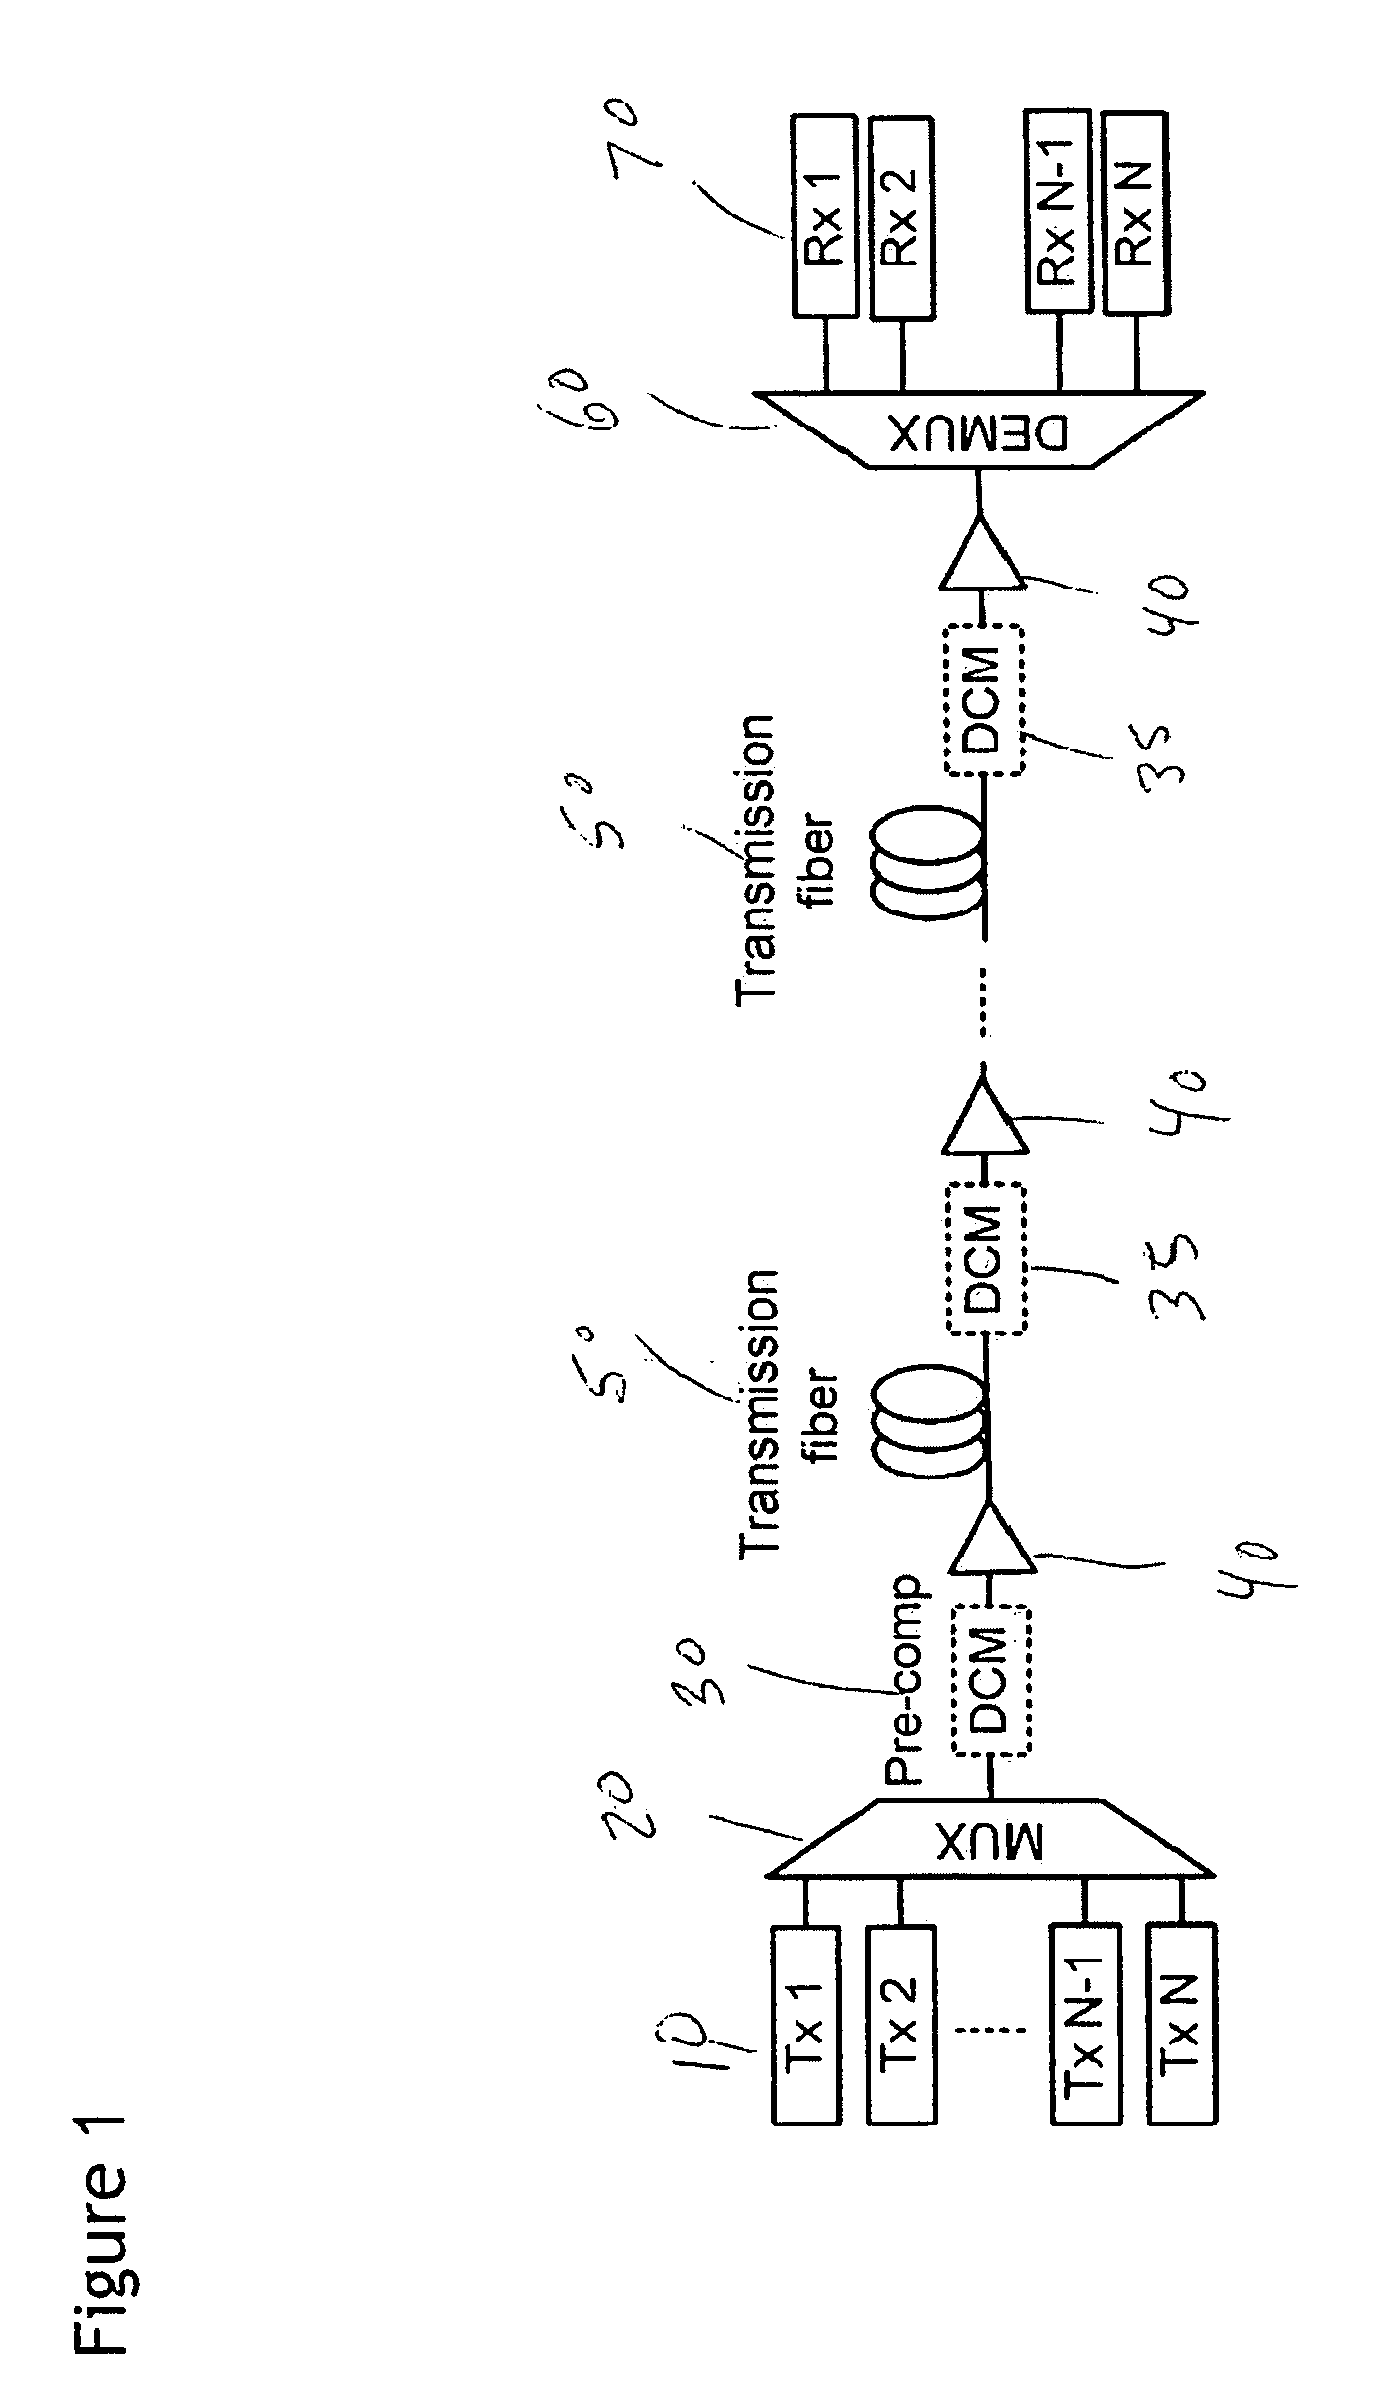 System, method and apparatus to suppress inter-channel nonlinearities in WDM systems with coherent detection